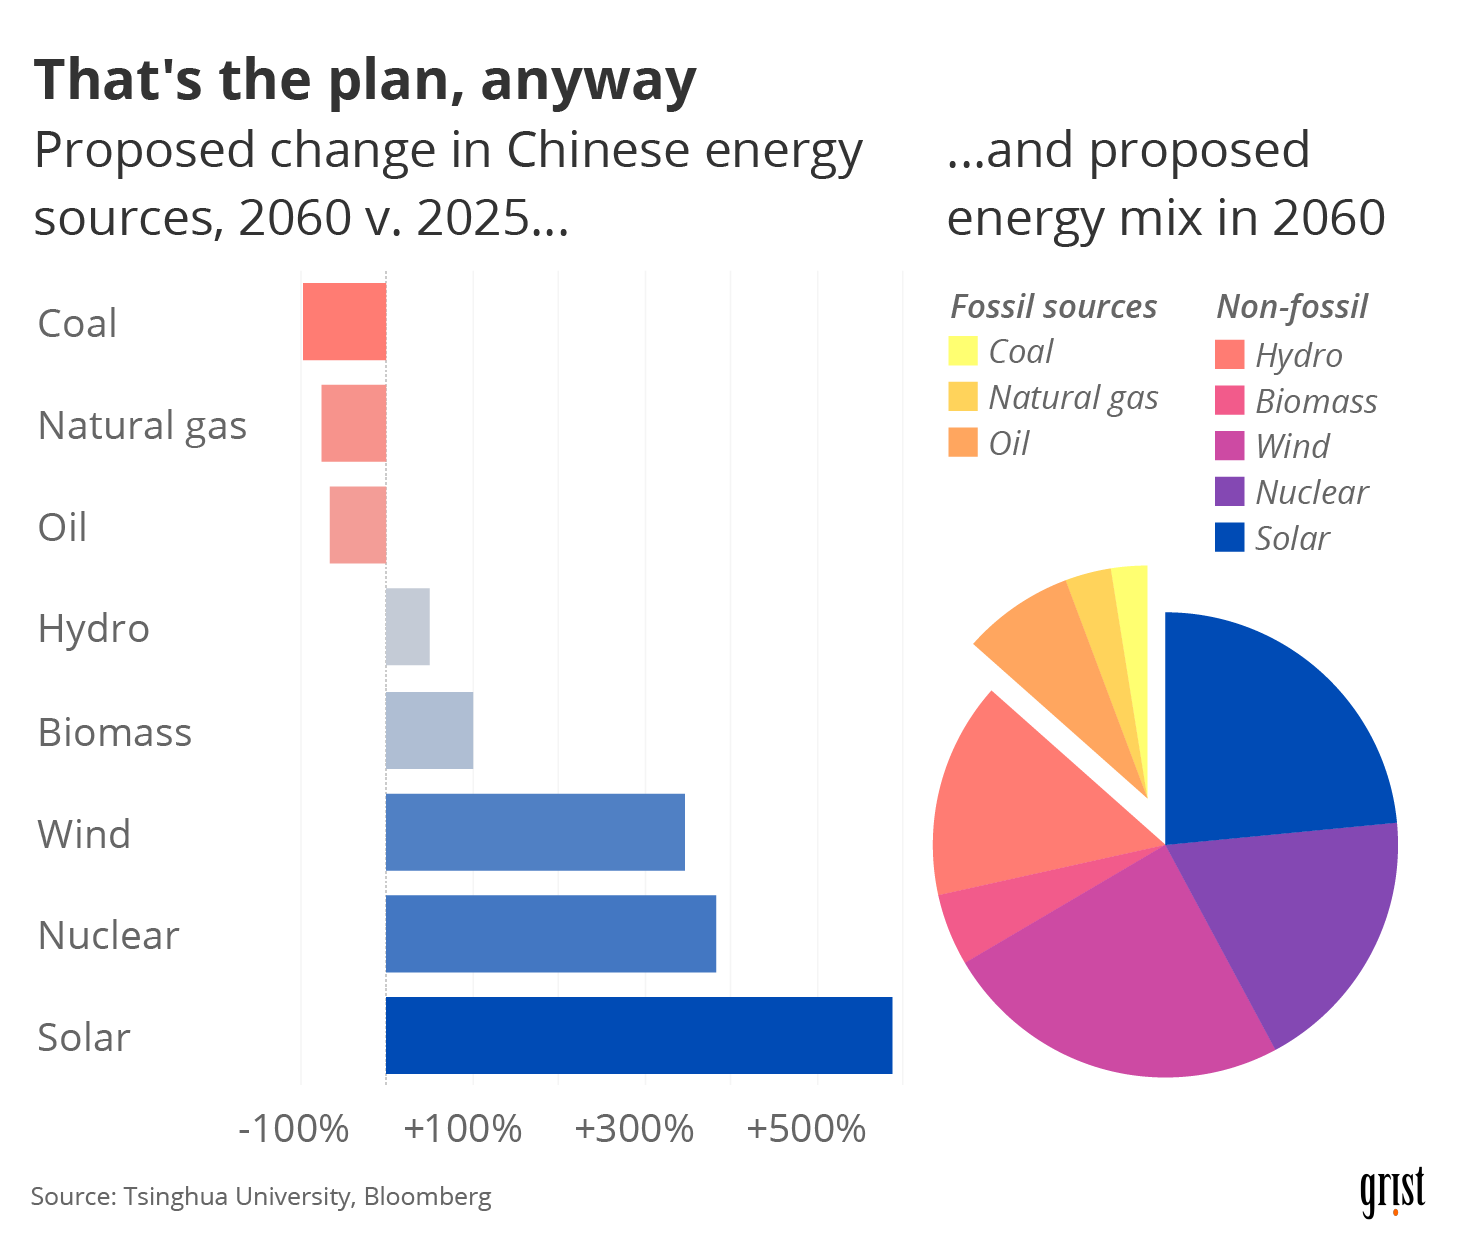 A bar chart showing the proposed change in Chinese energy sources, 2060 v. 2025. While coal, natural gas, and oil will fall, solar is projected to see a 600% increase. An accompanying pie chart shows fossil sources in 2060 taking up less than 25% of the total energy mix.